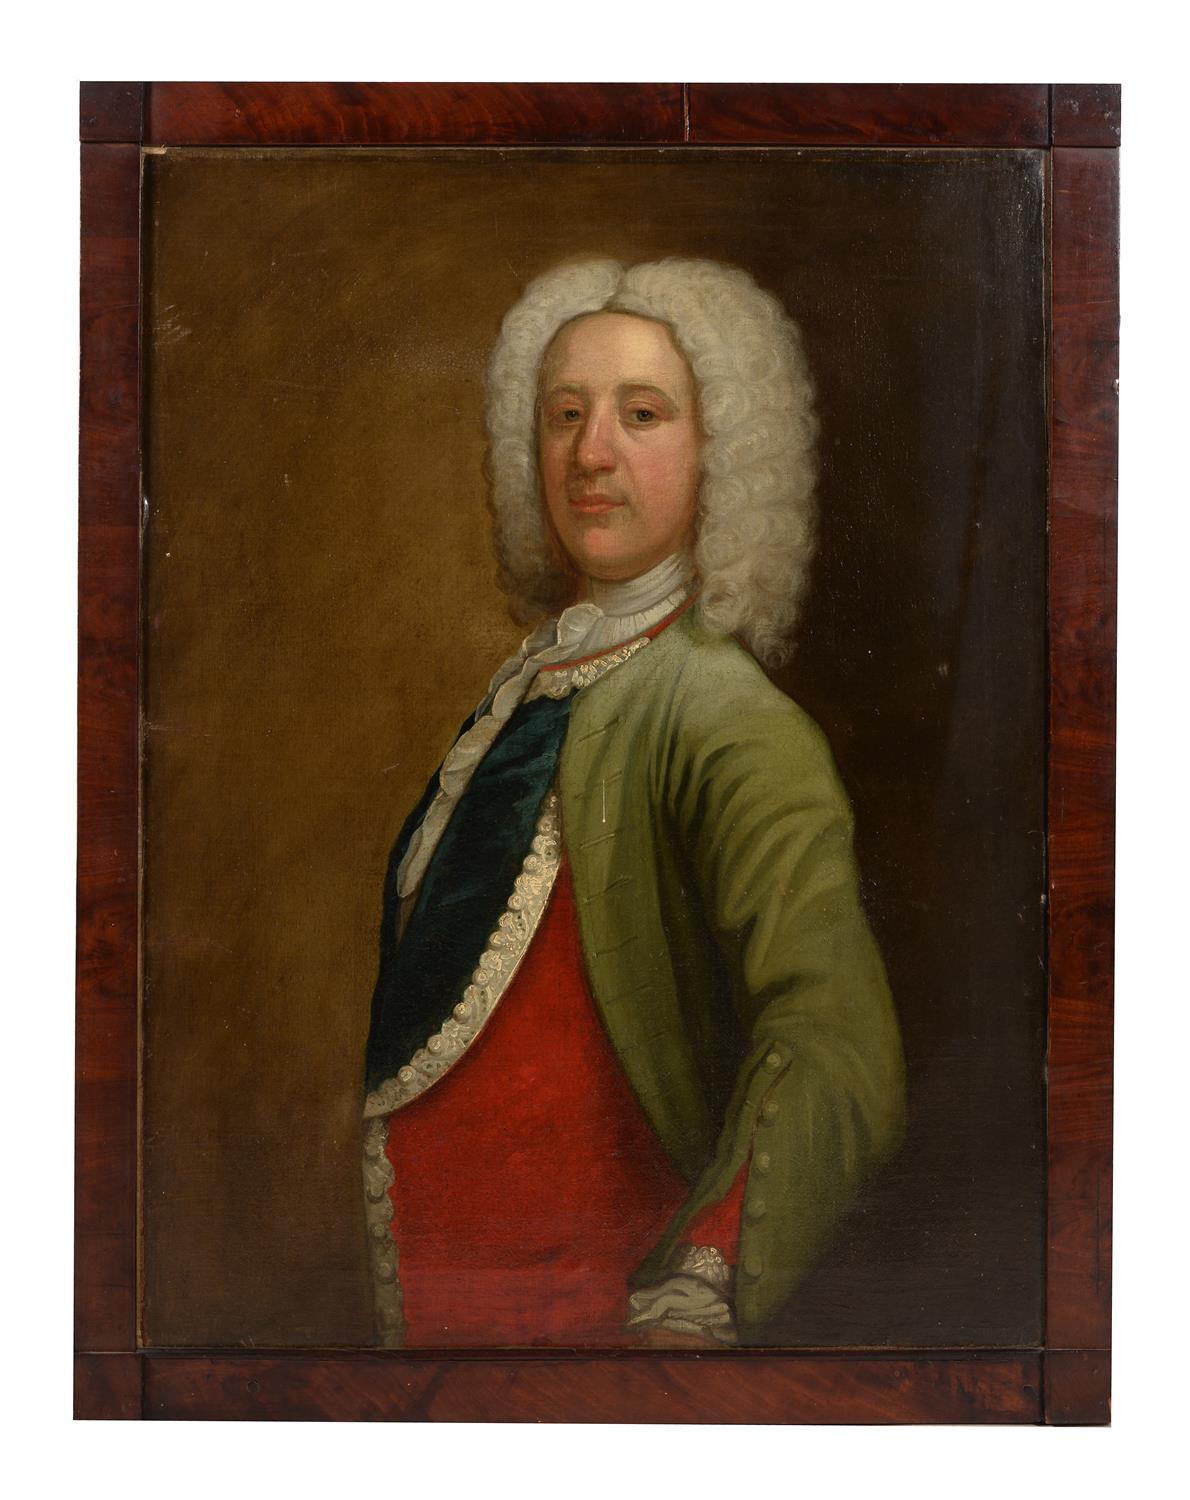 English School (18th century), Portrait of a gentleman in an embroidered waistcoat and jacket - Image 2 of 3